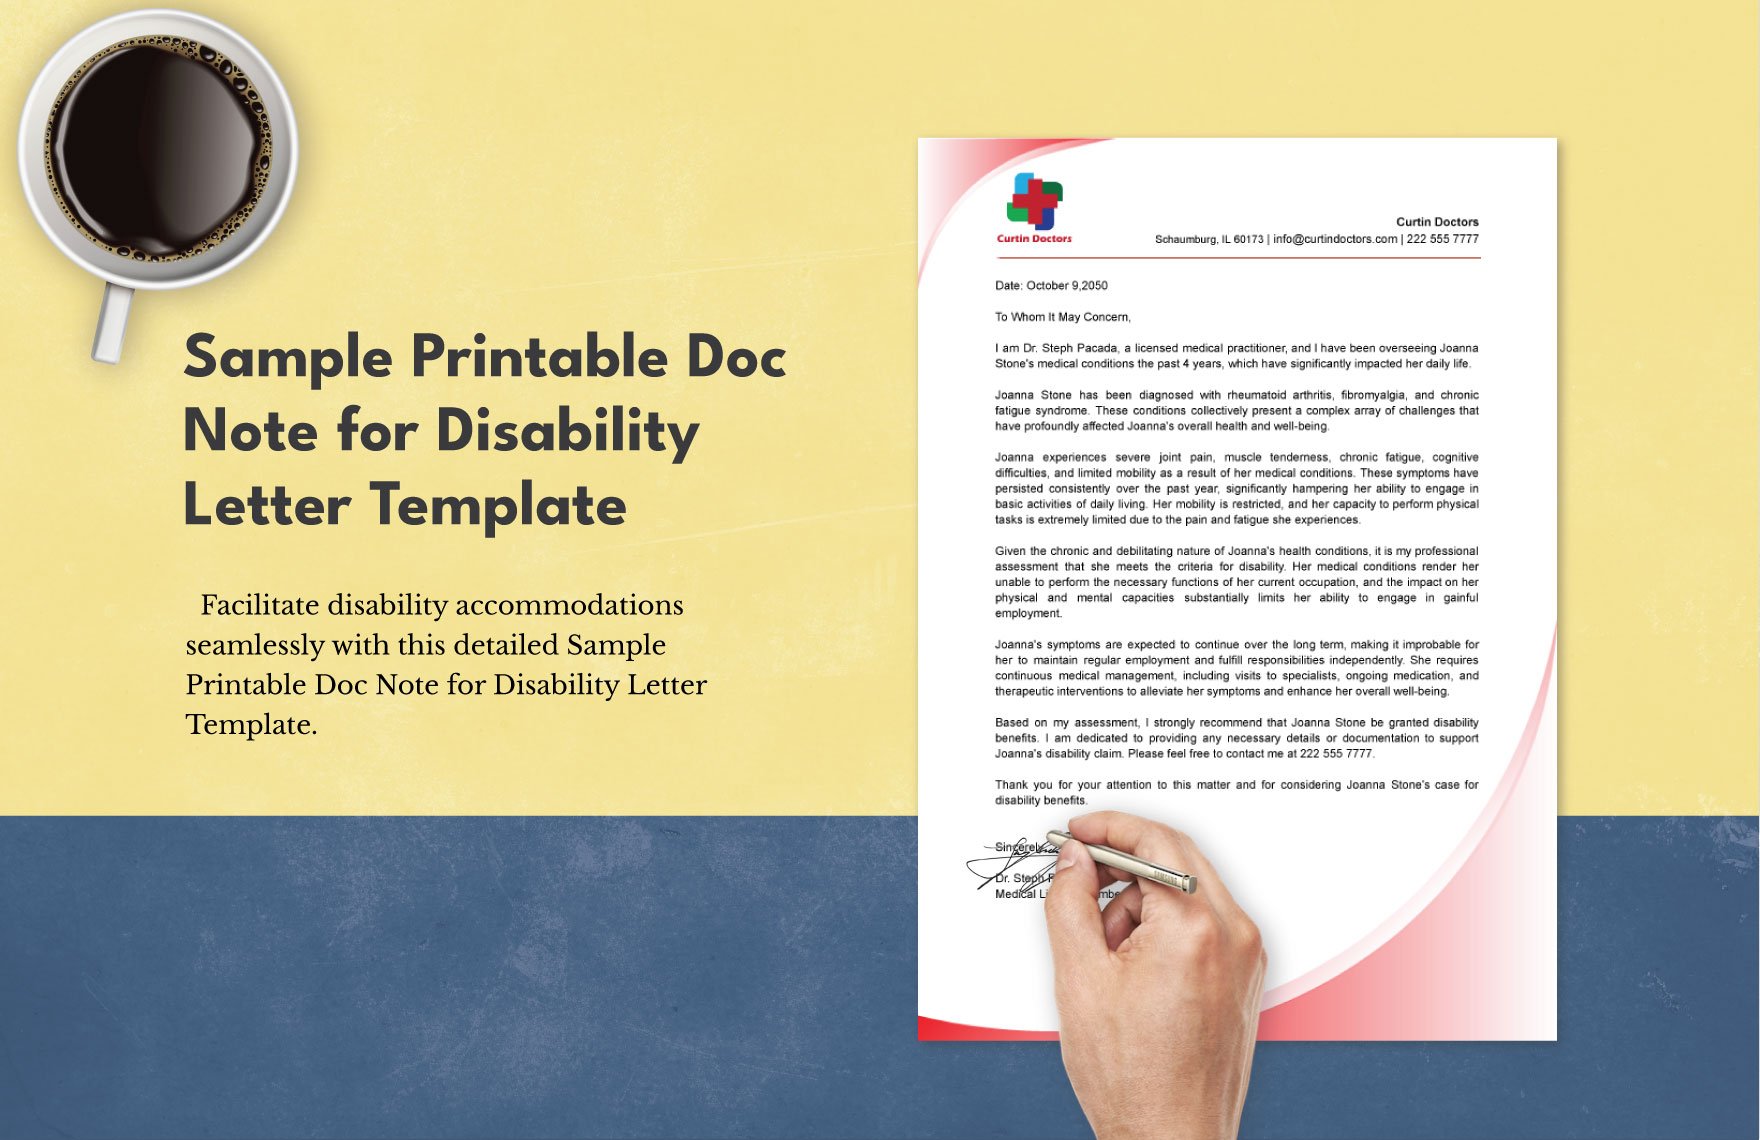 Sample Printable Doc Note for Disability Letter Template